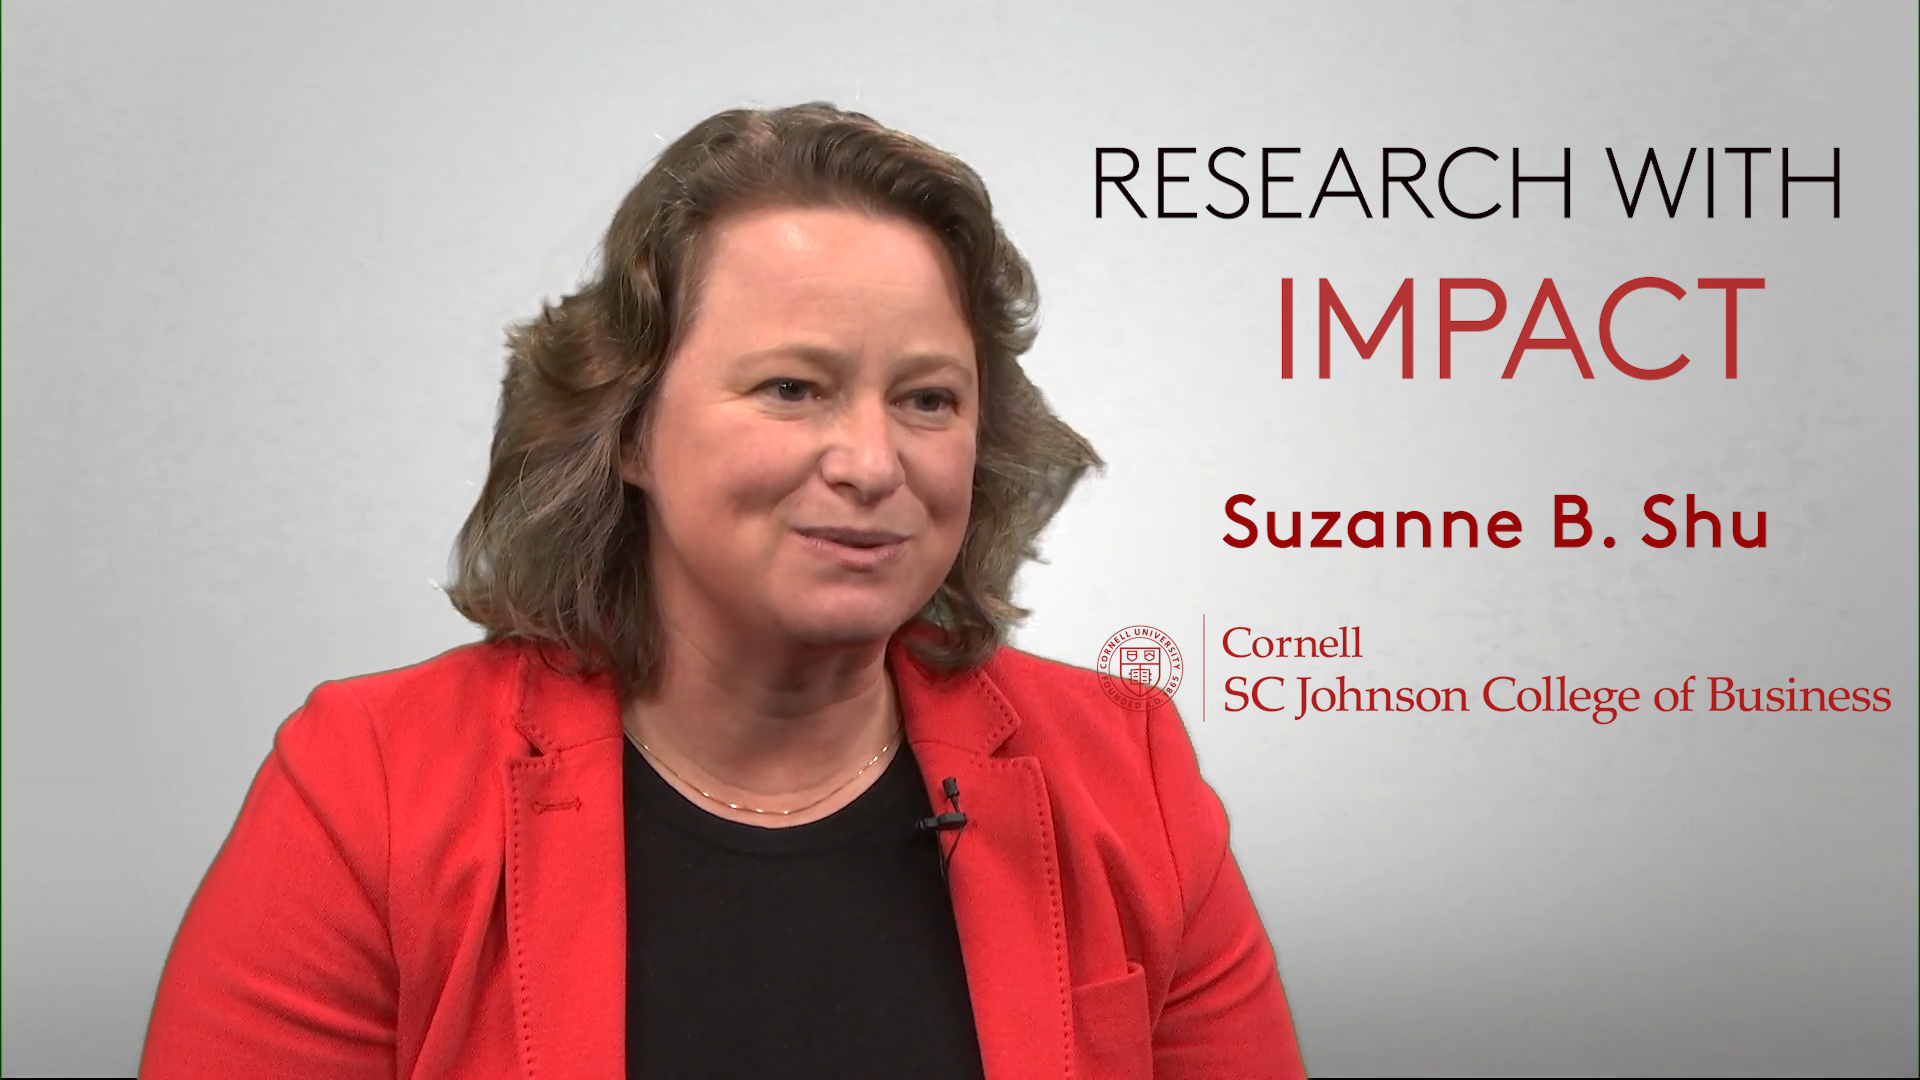 Suzanne Shu on the Research With Impact video series